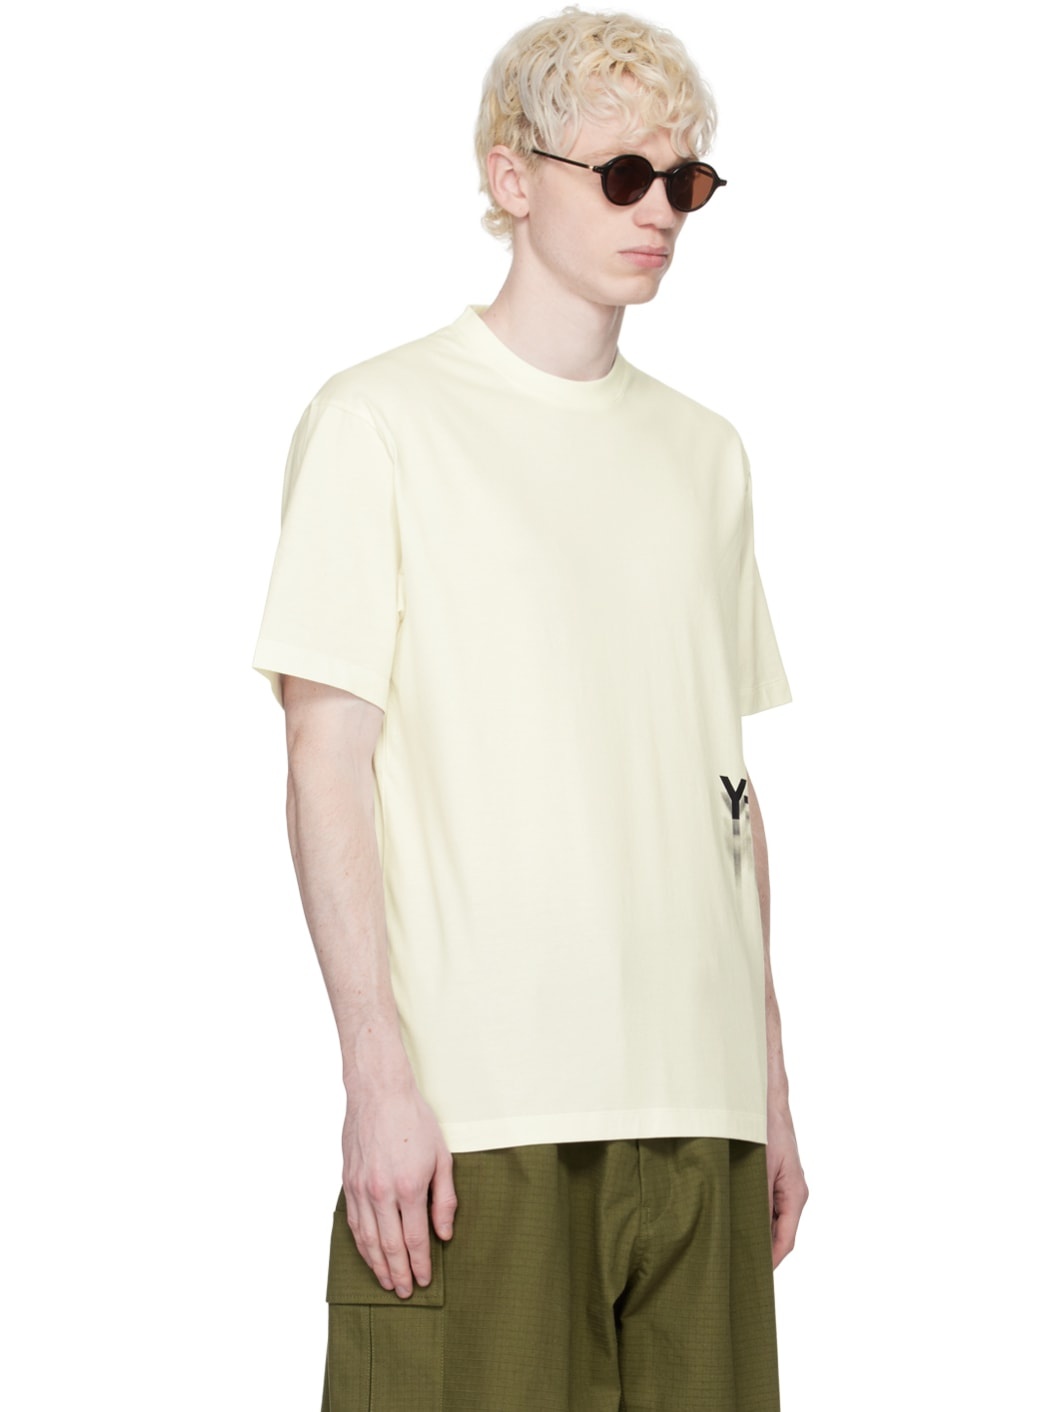 Off-White Graphic T-Shirt - 2